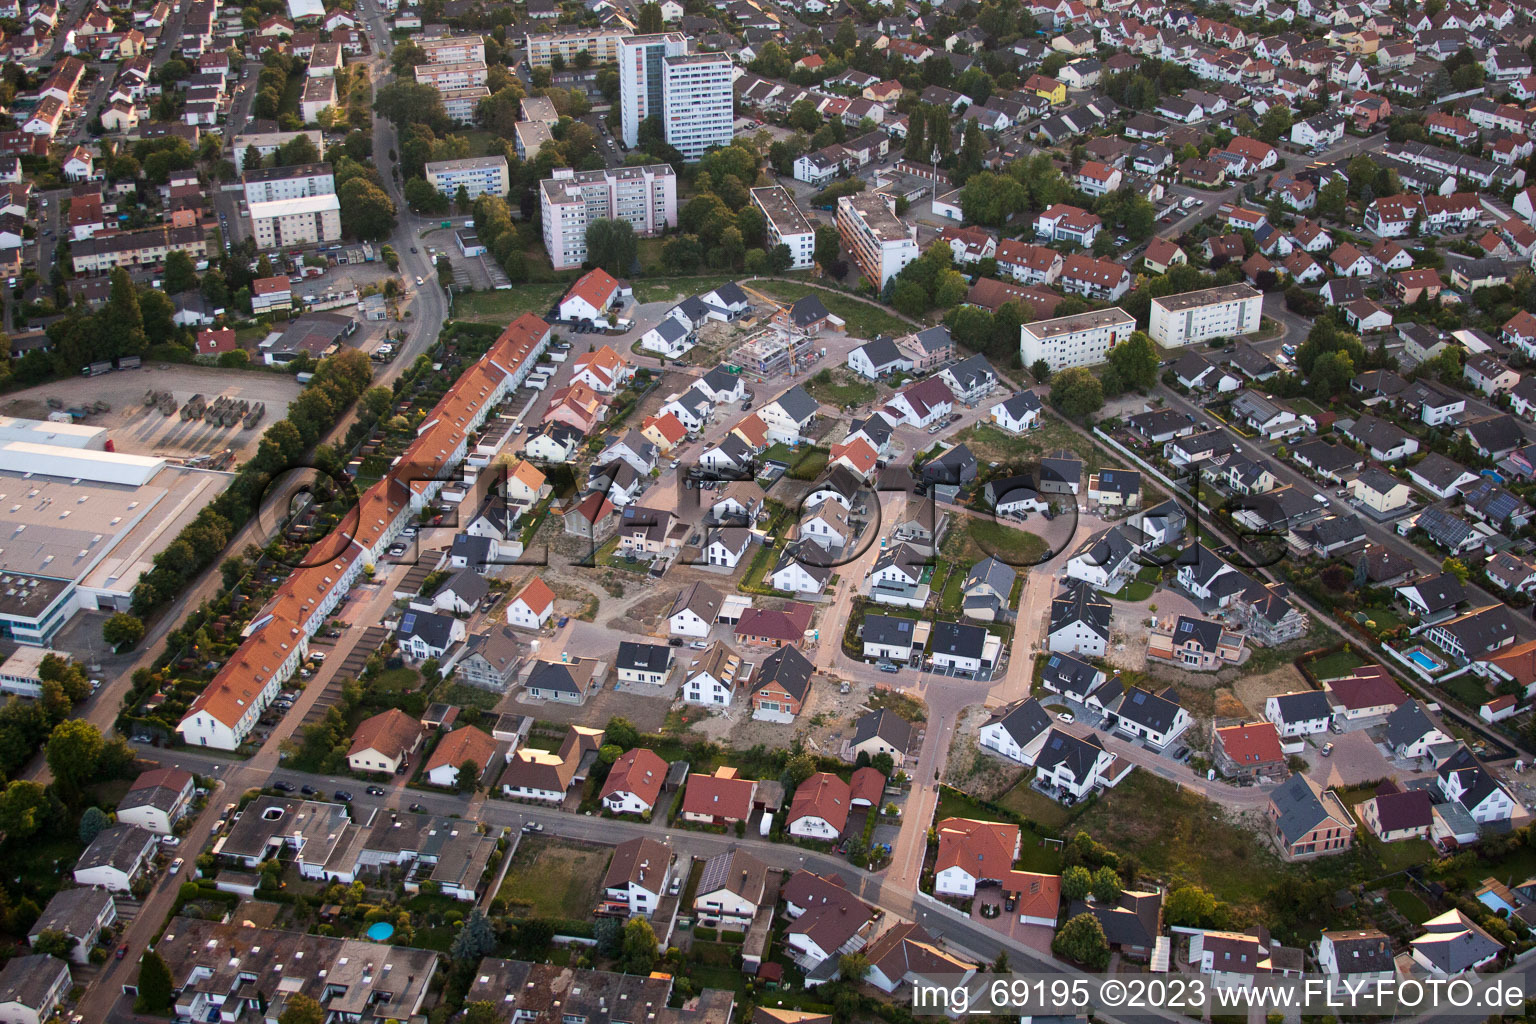 District Roxheim in Bobenheim-Roxheim in the state Rhineland-Palatinate, Germany from the drone perspective